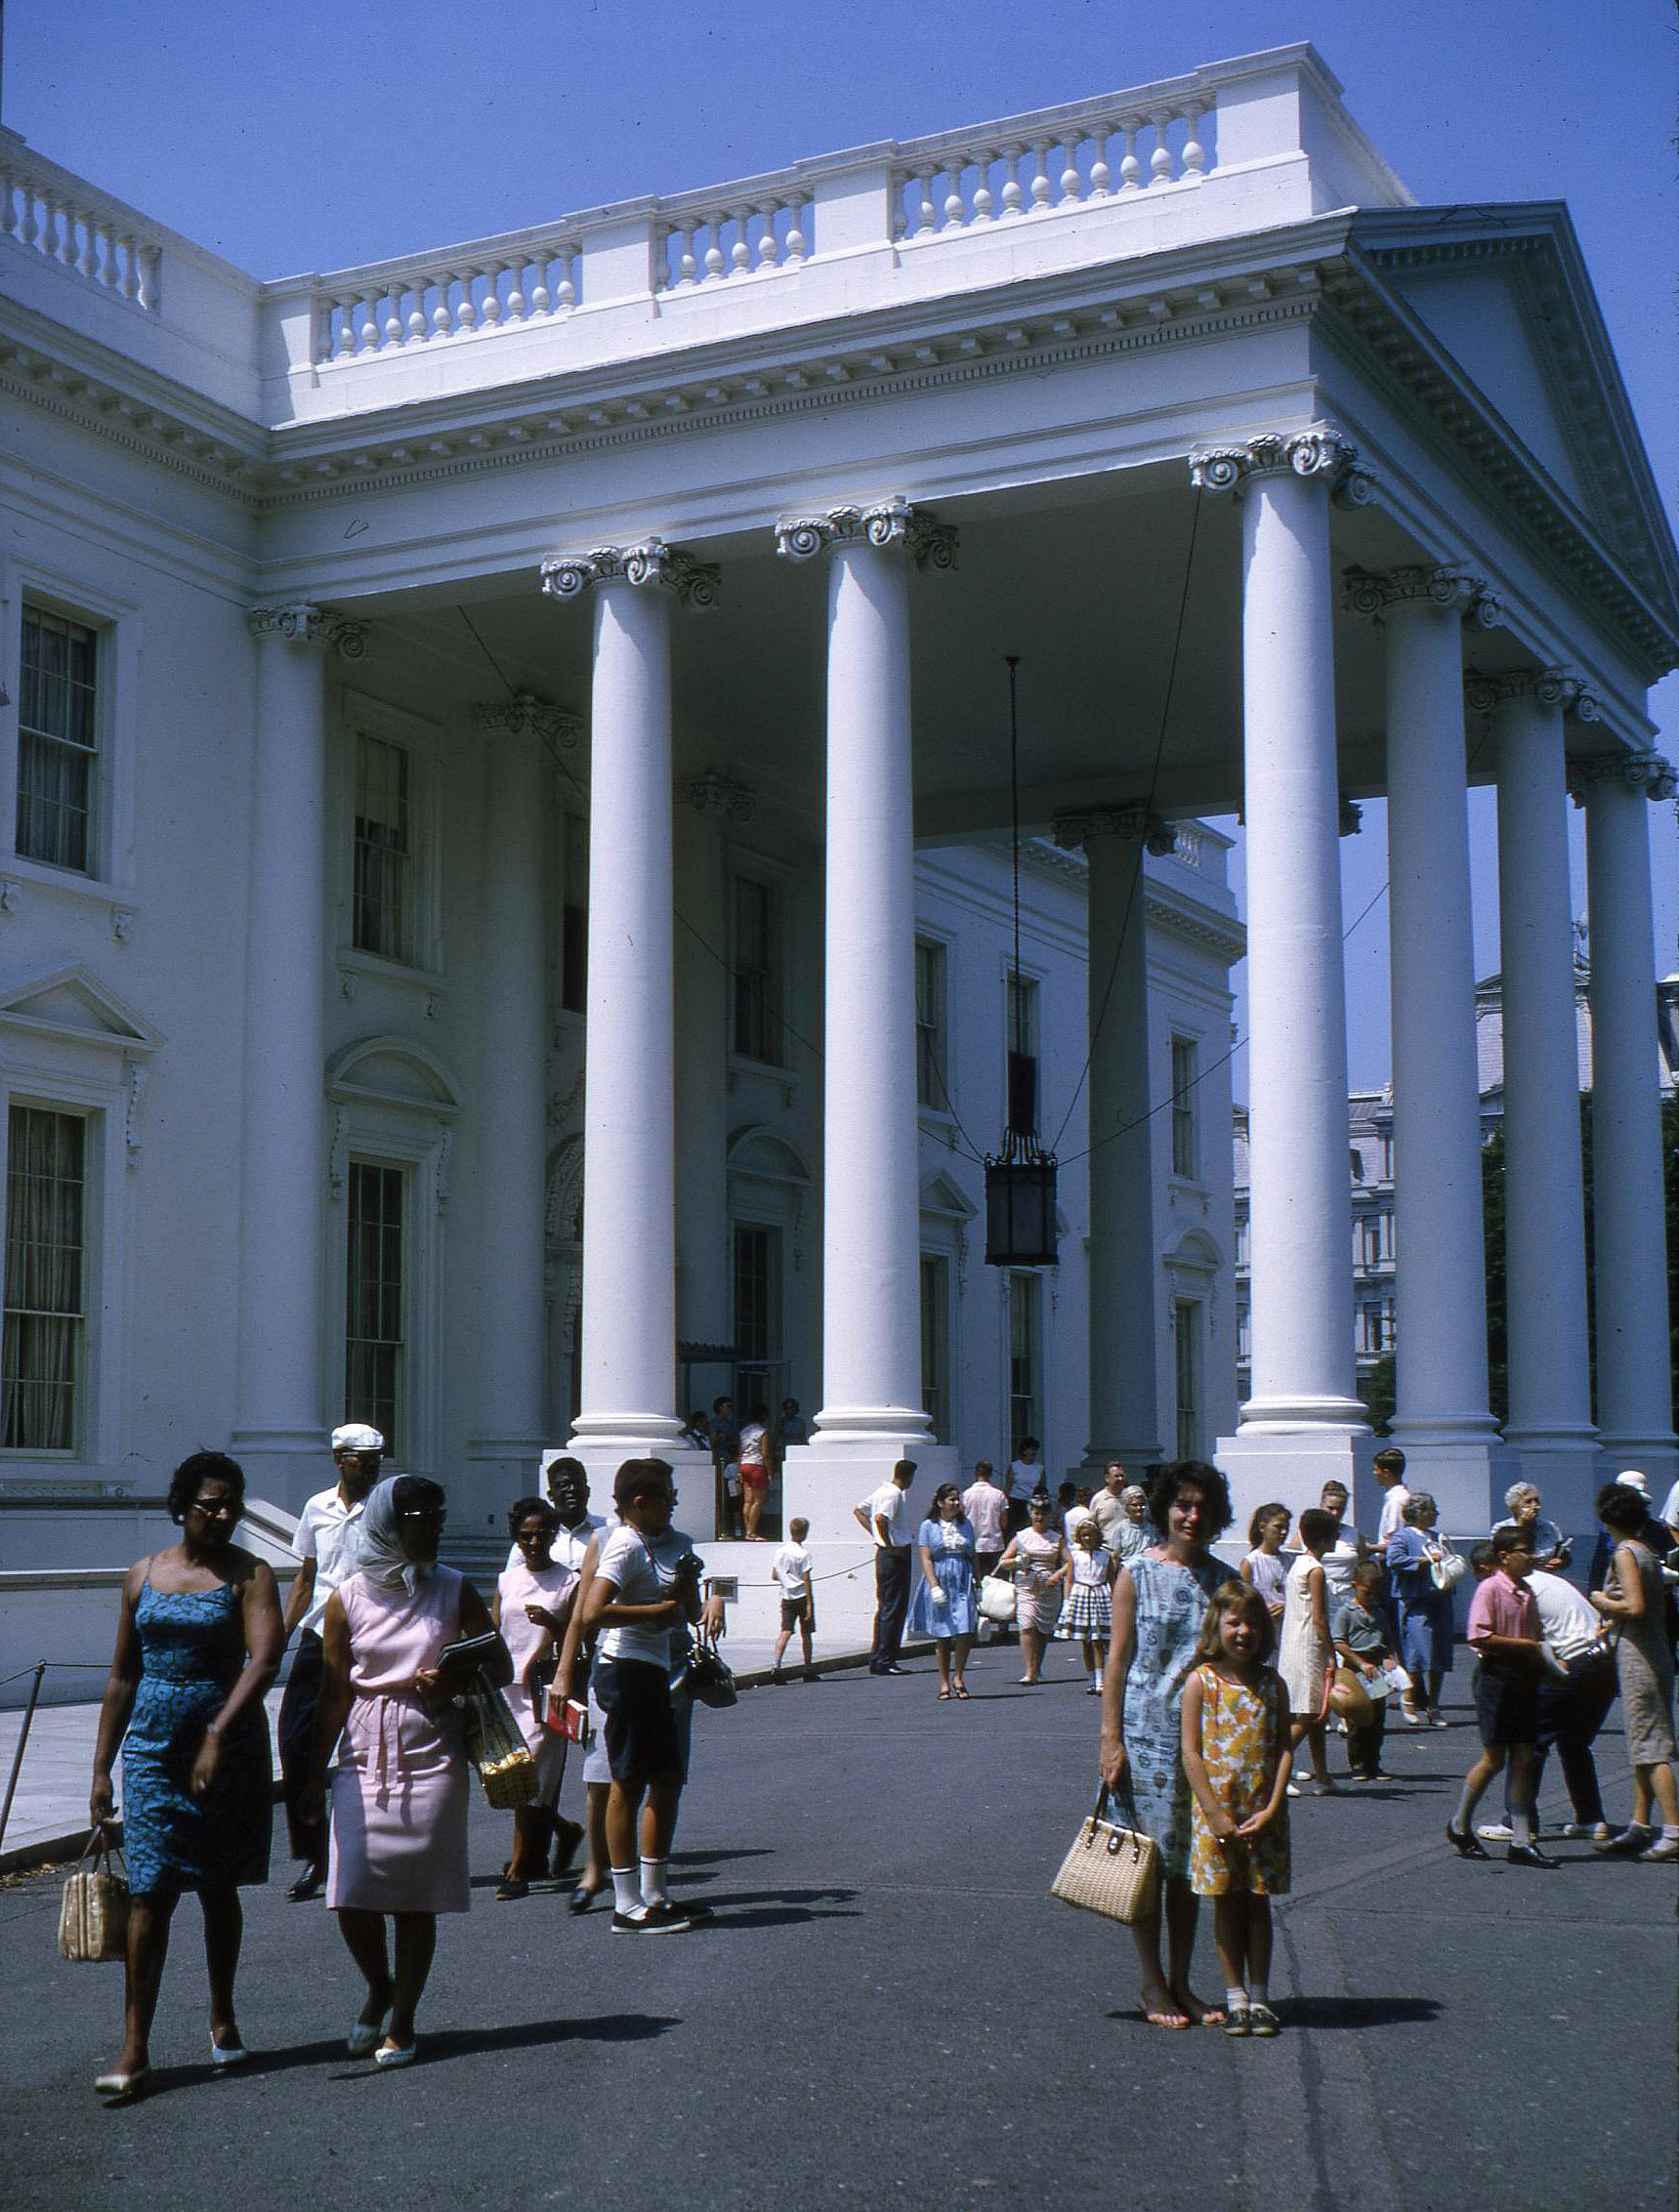 It's a fine morning at the White House with my mom and sister posed for the shot in this Kodachrome slide from 1965. View full size.